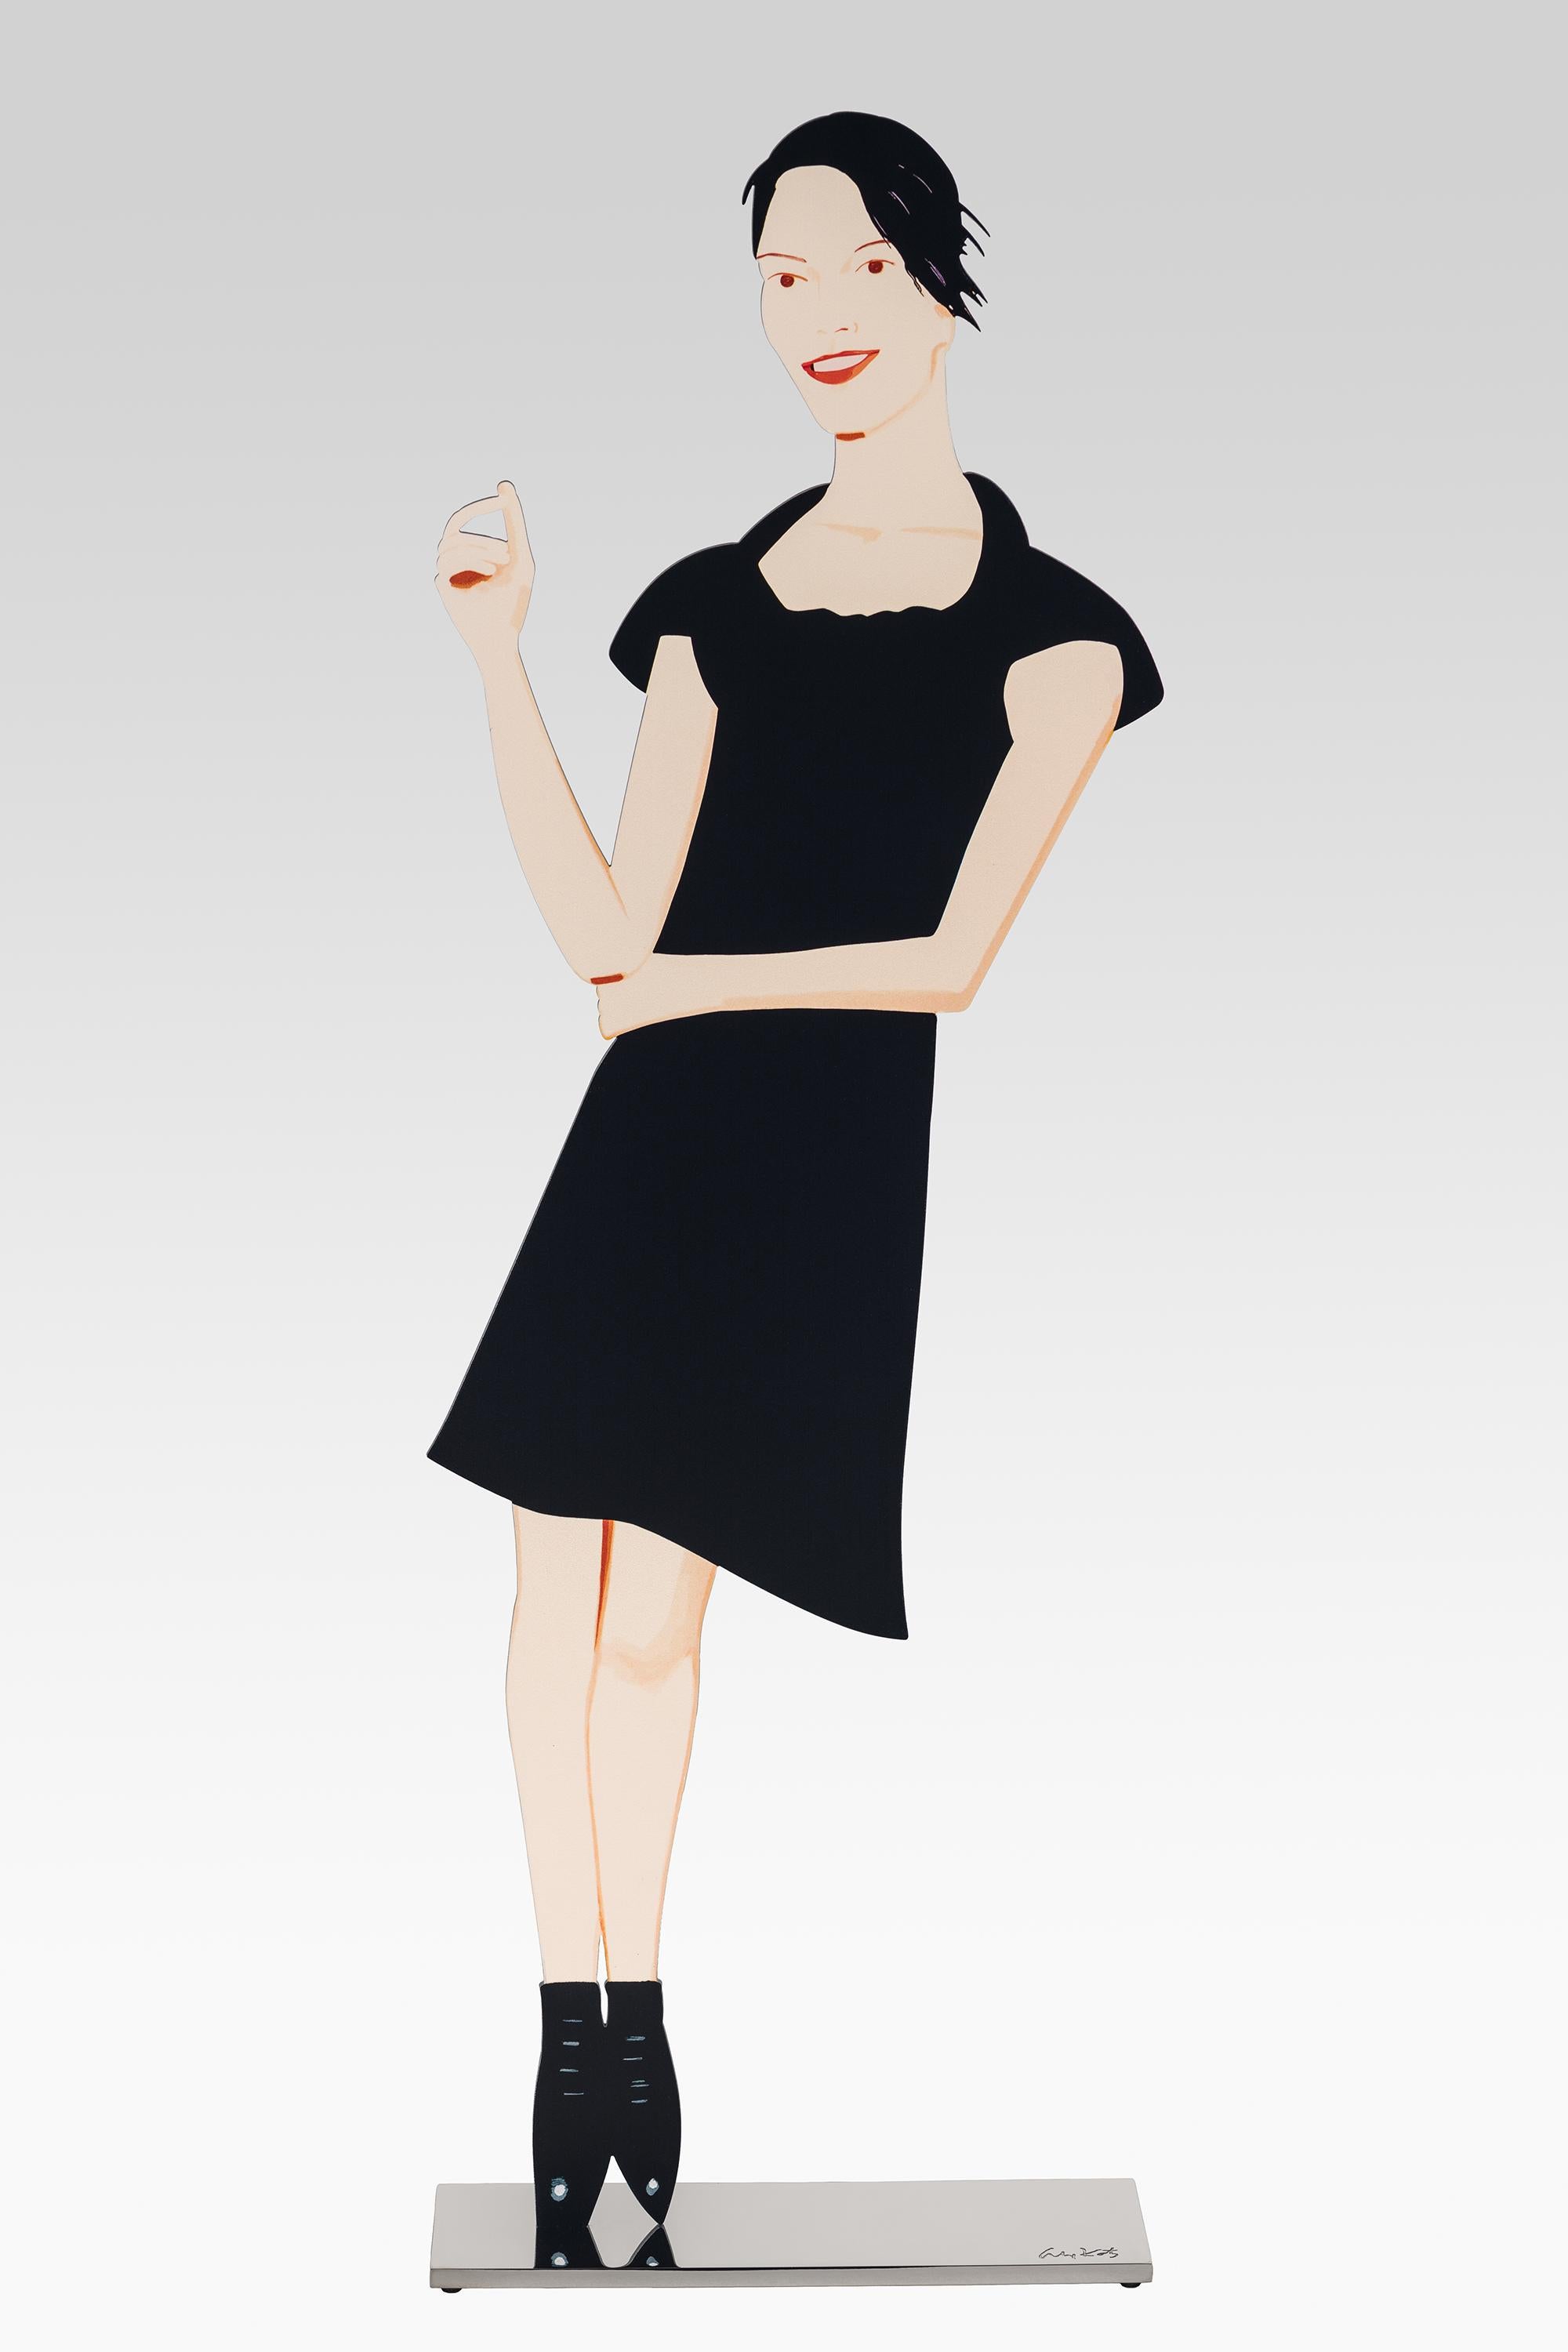 The "Black Dress" sculptures by Alex Katz are more than figurative sculptures. They are a homage to elegance, fashion and the female body. This cut-out is made from powder-coated aluminium and stands on an aluminium plinth. 58 x 18 cm. Edition of